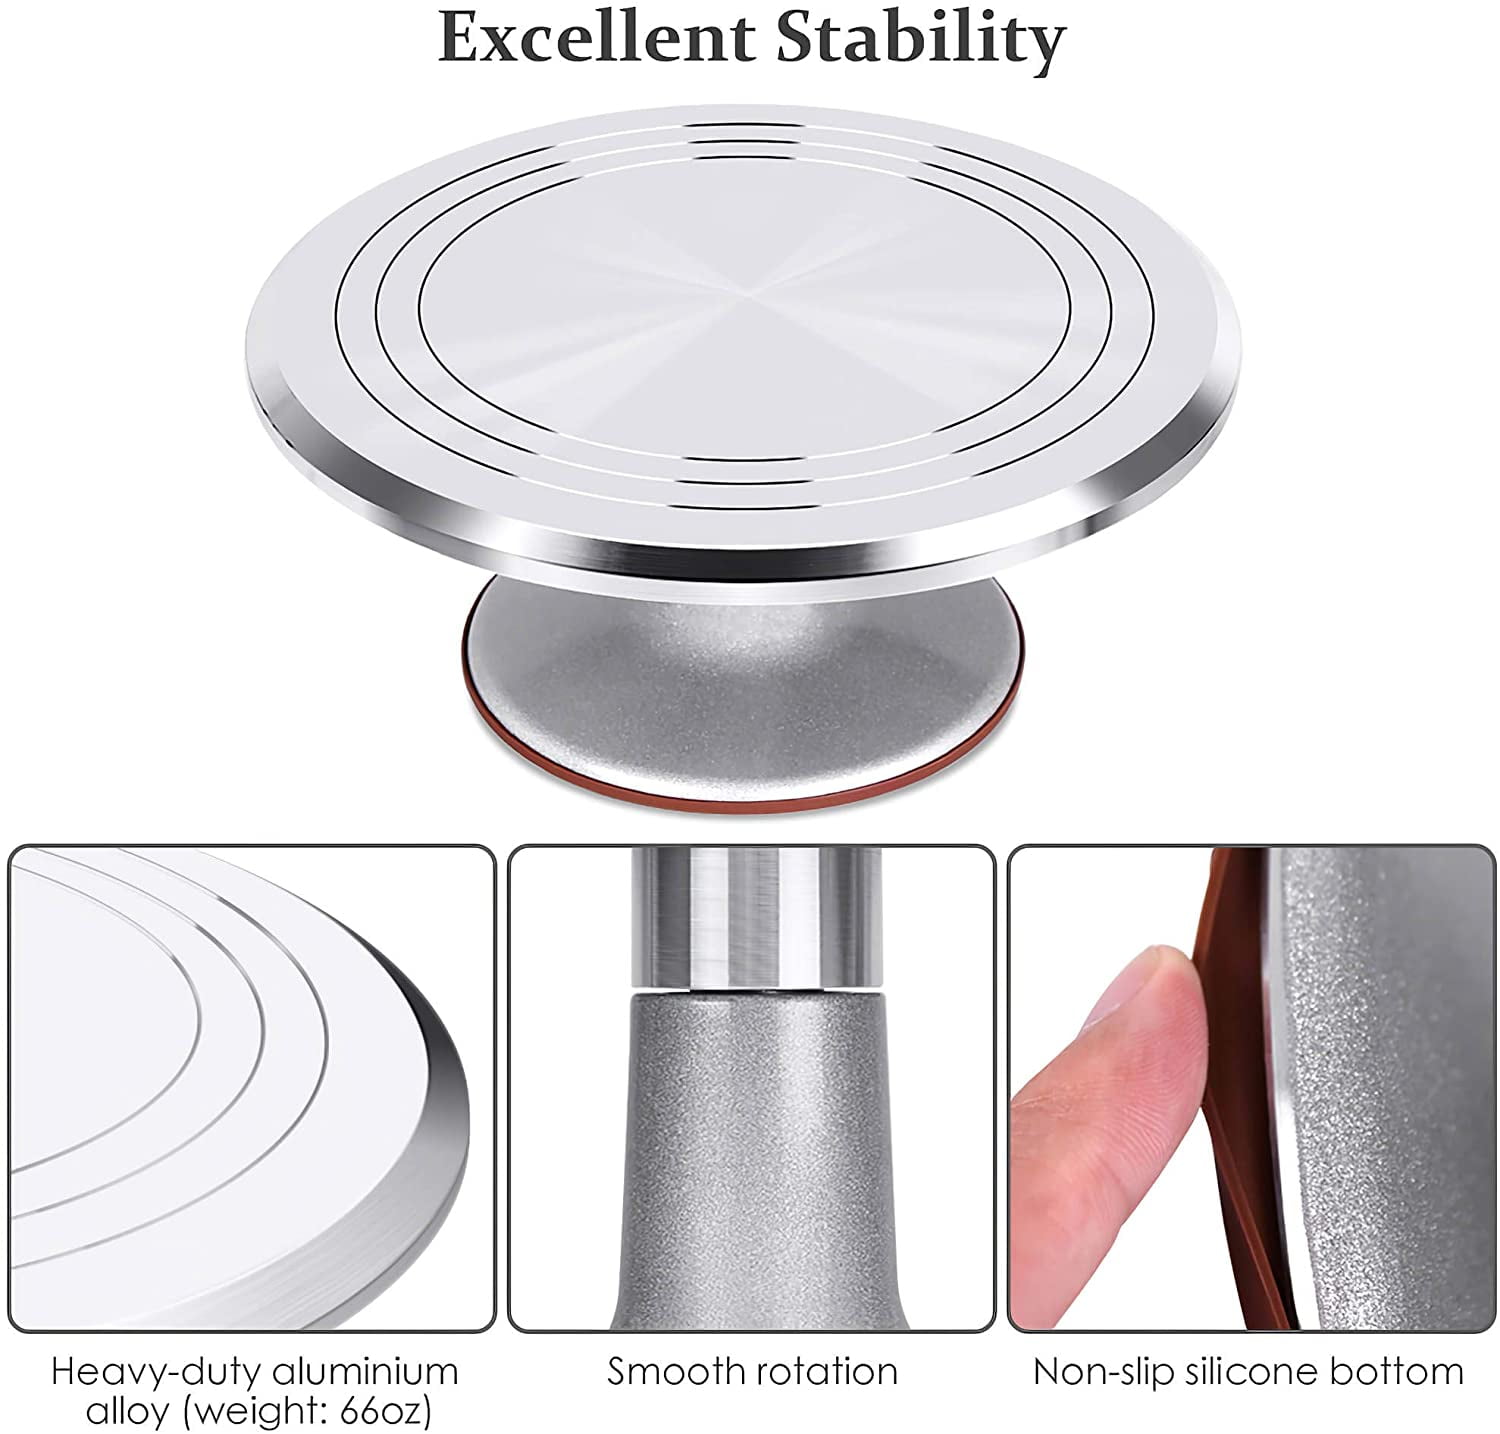 Turntable,Cake Stand, Stainless Steel Smooth Rotating Turntable